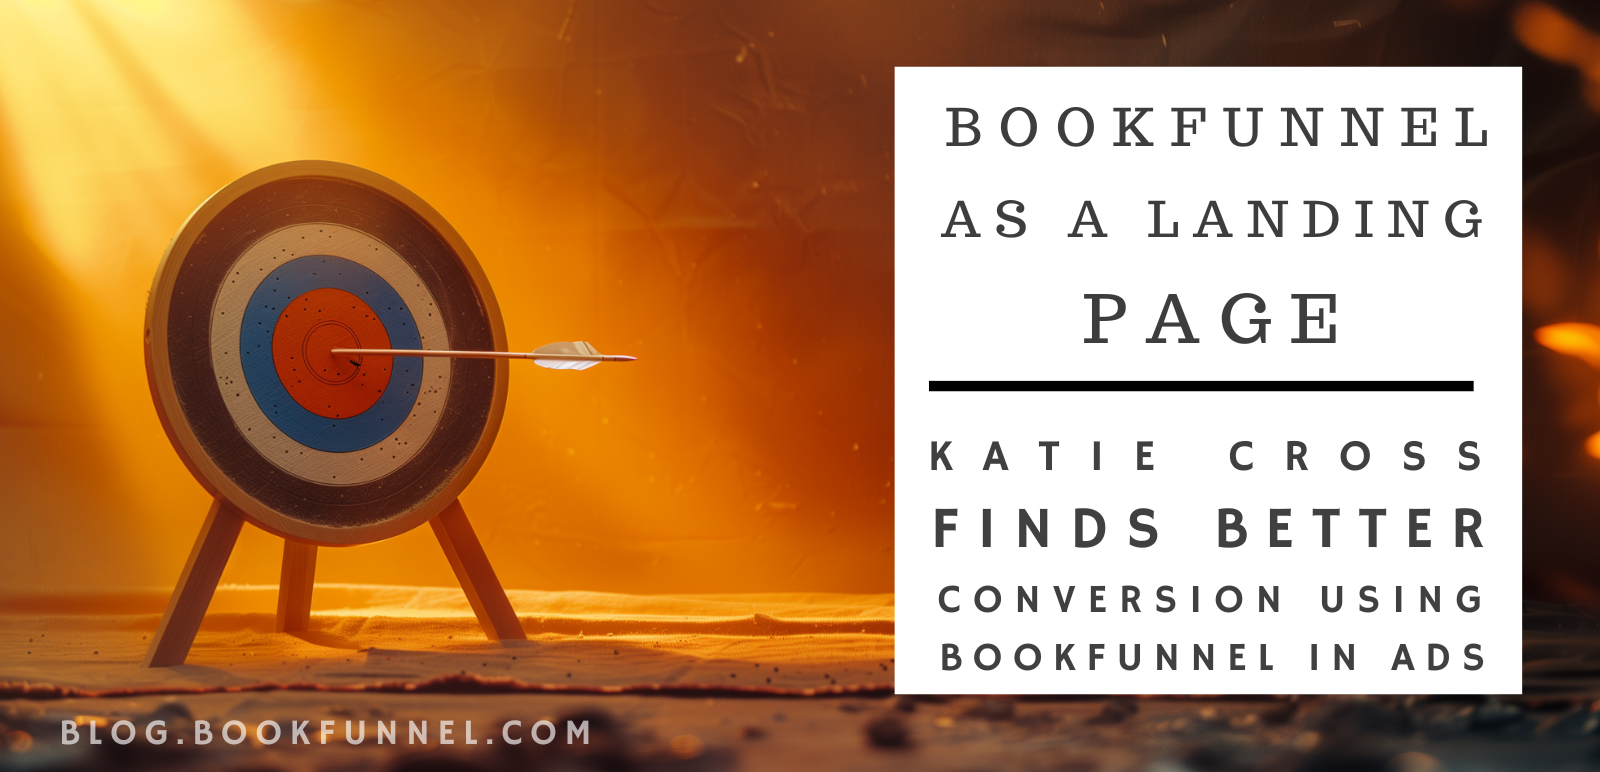 Katie Cross: BookFunnel as a Landing Page Improves Facebook Ads